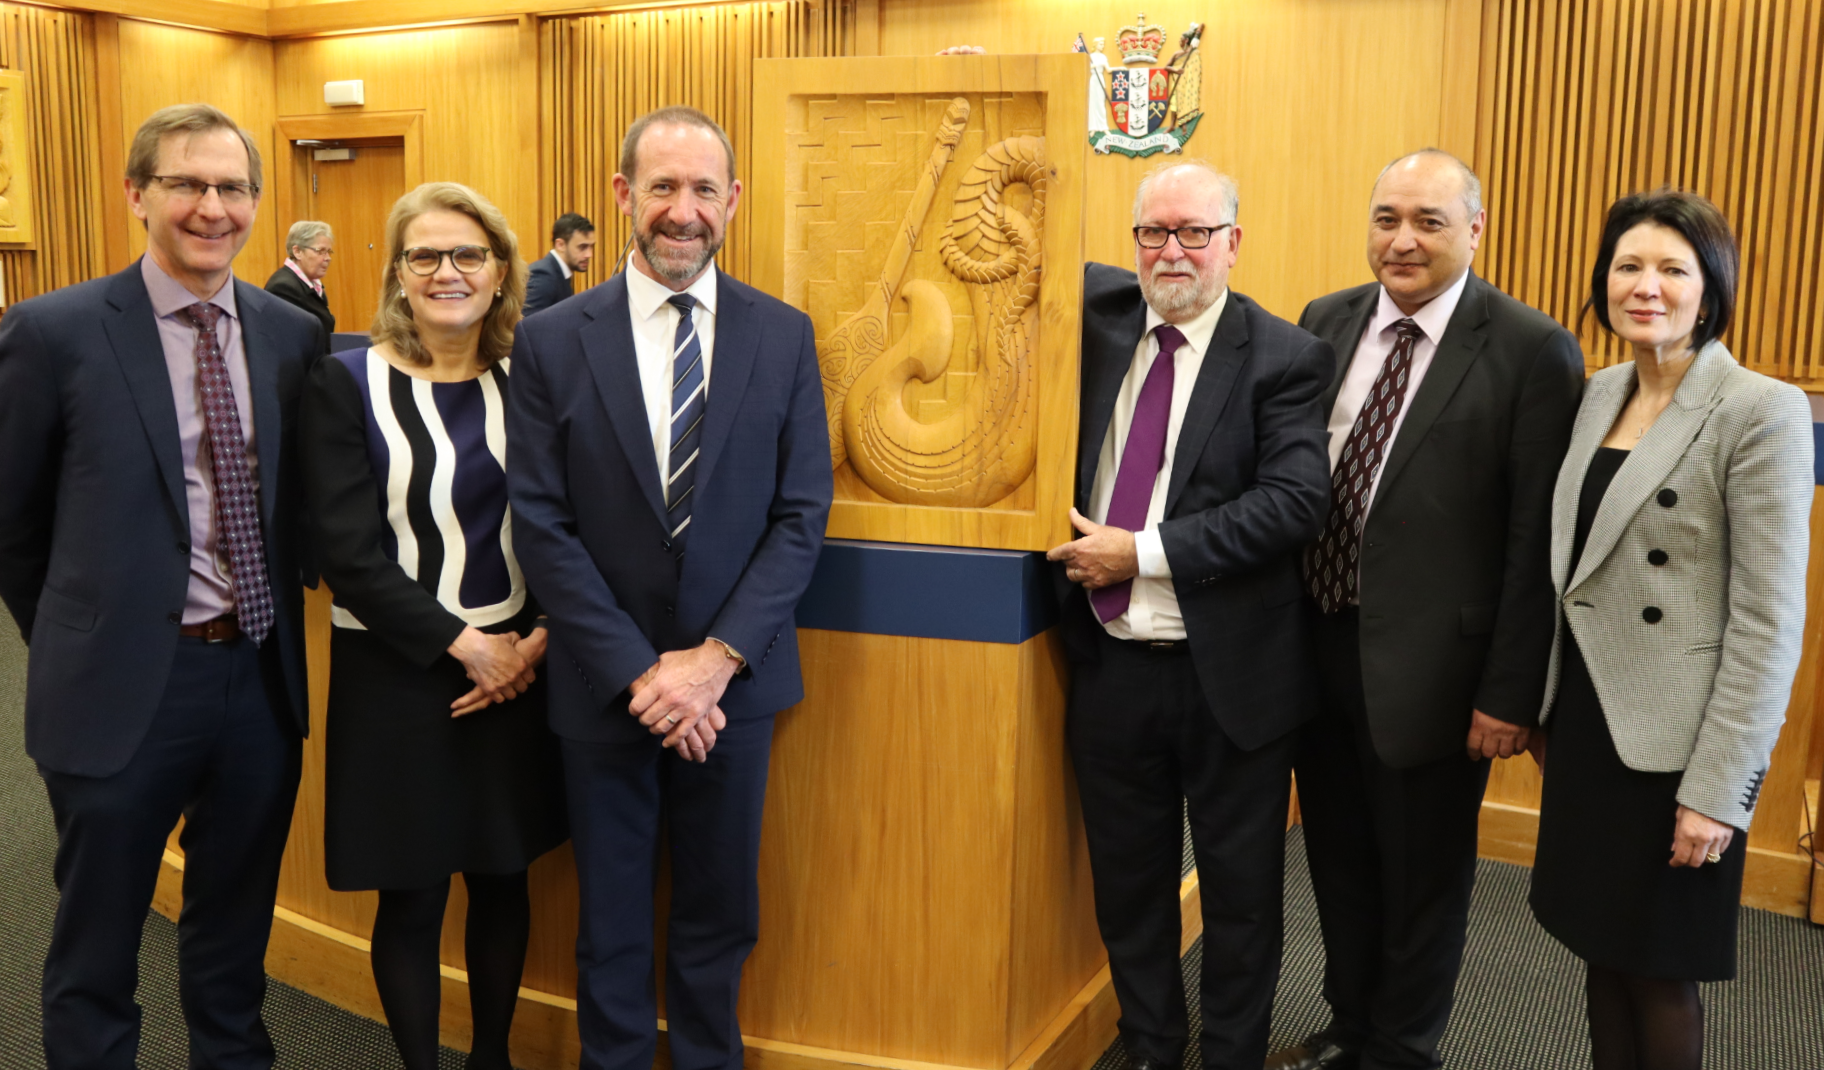 Image of Justice Minister Andrew Little, with the Chief Justice, Dame Helen Winkelmann, the Secretary for Justice, Andrew Kibblewhite, the Principal Youth Court Judge, John Walker, the Chief District Court Judge, Heemi Taumaunu, and the Principal Family Court Judge, Jacquelyn Moran.